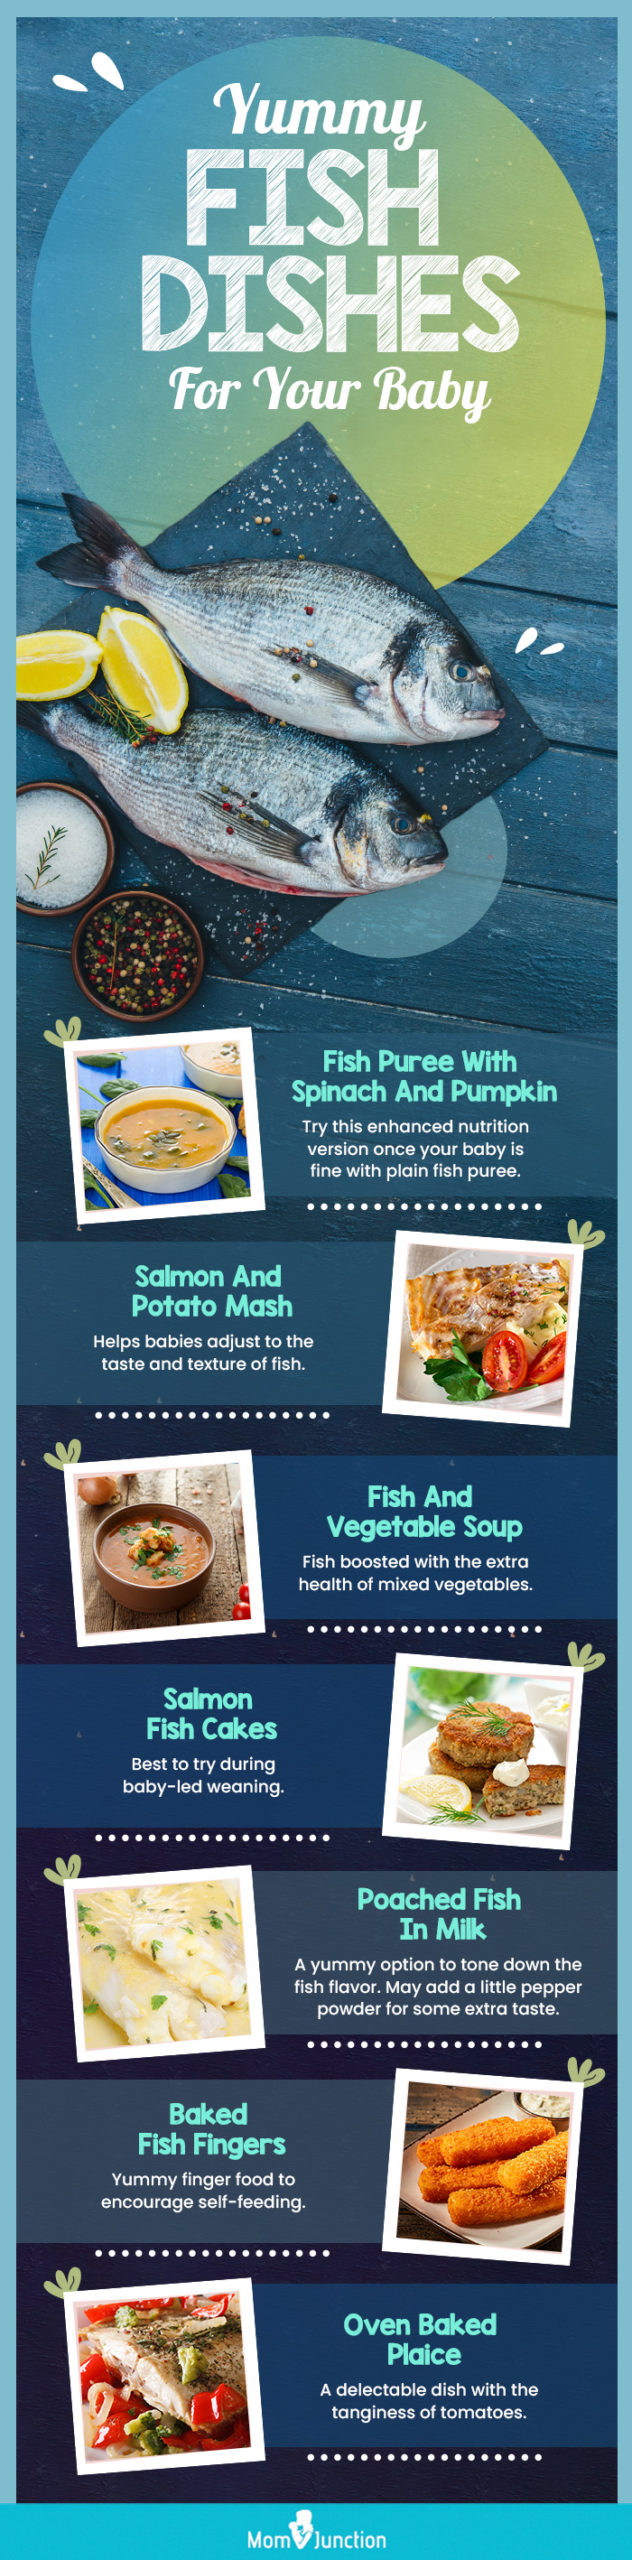 yummy fish dishes for your baby (infographic)